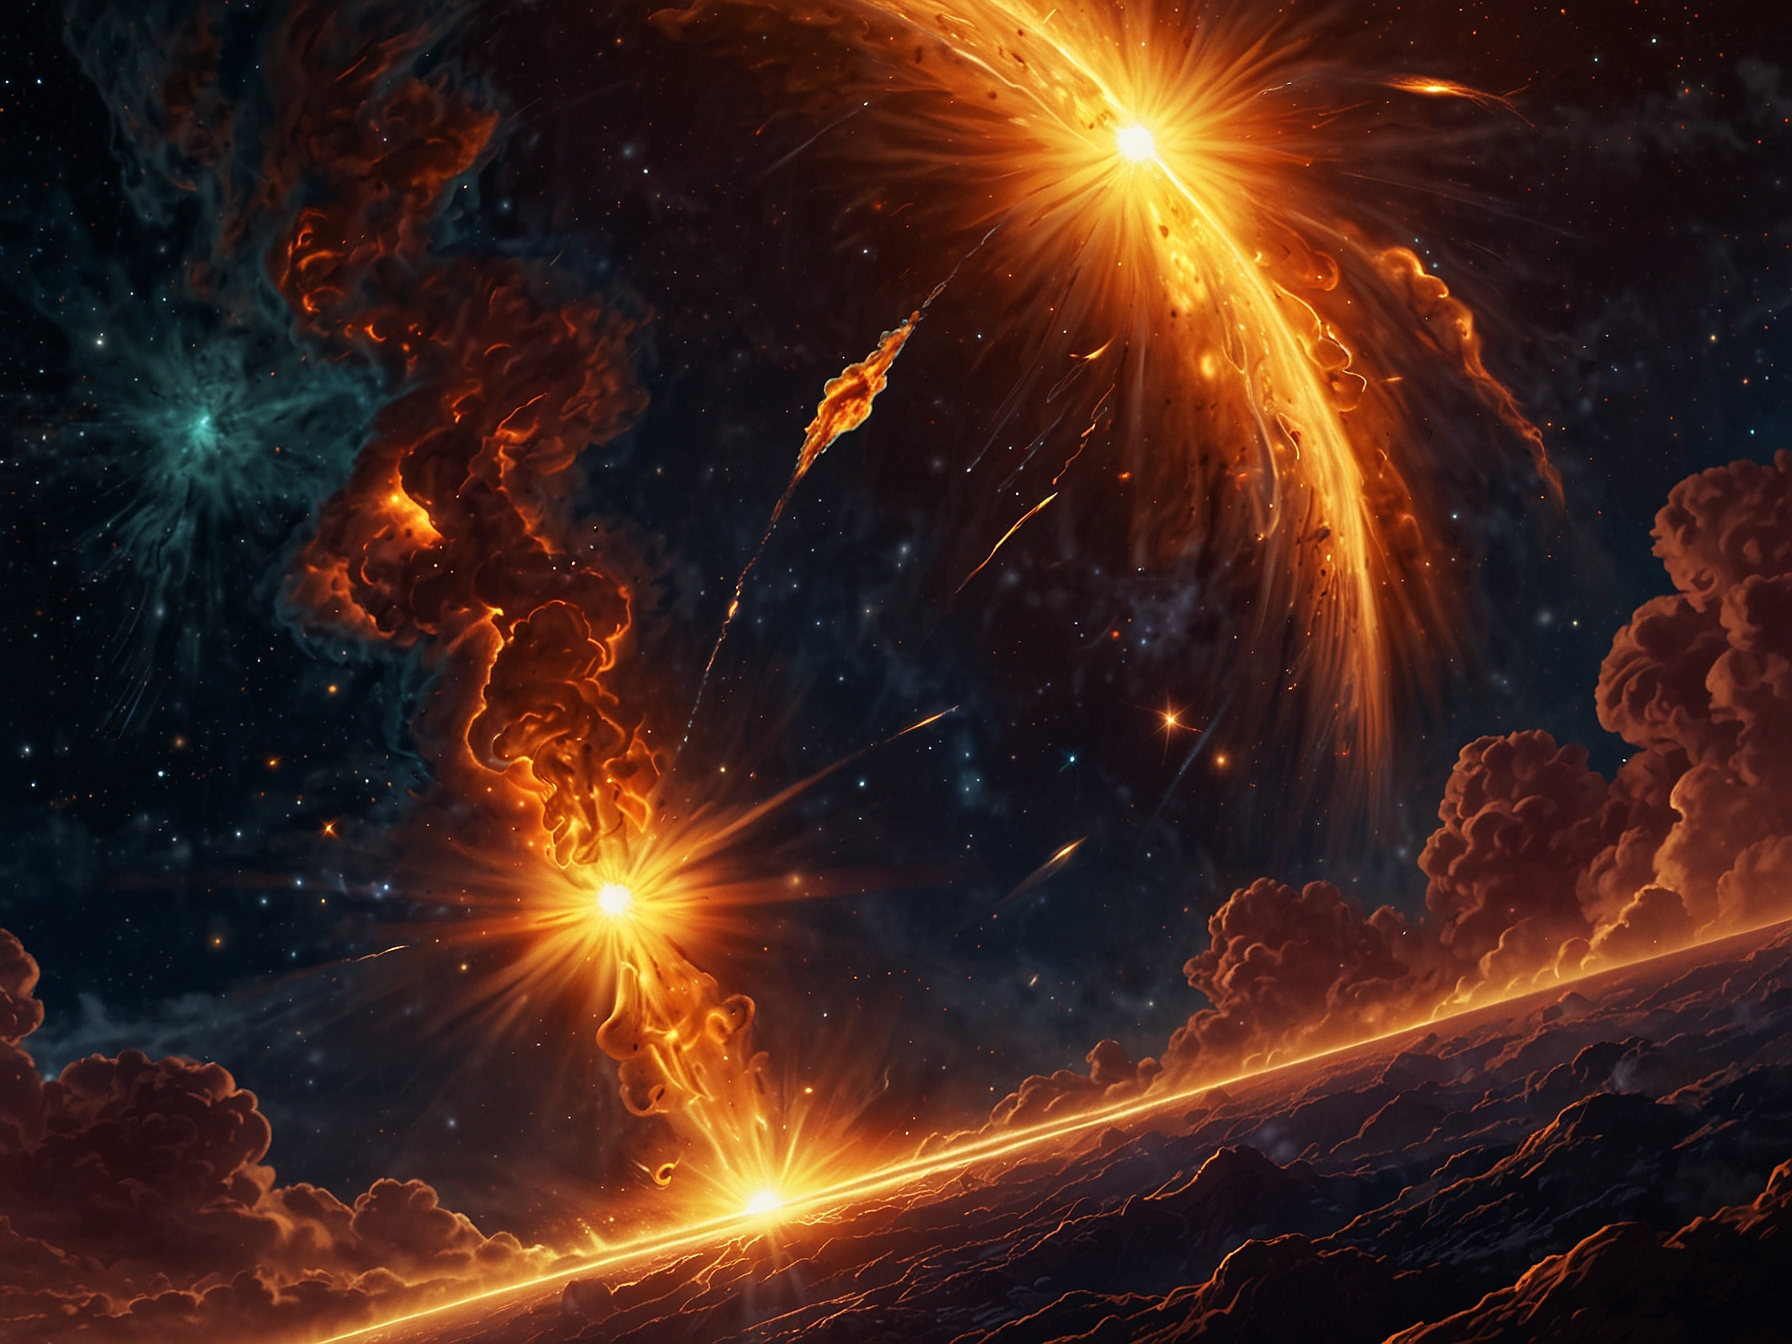 Depiction of solar flares and coronal mass ejections, emphasizing their role in releasing energetic particles that pose health risks to lunar astronauts.